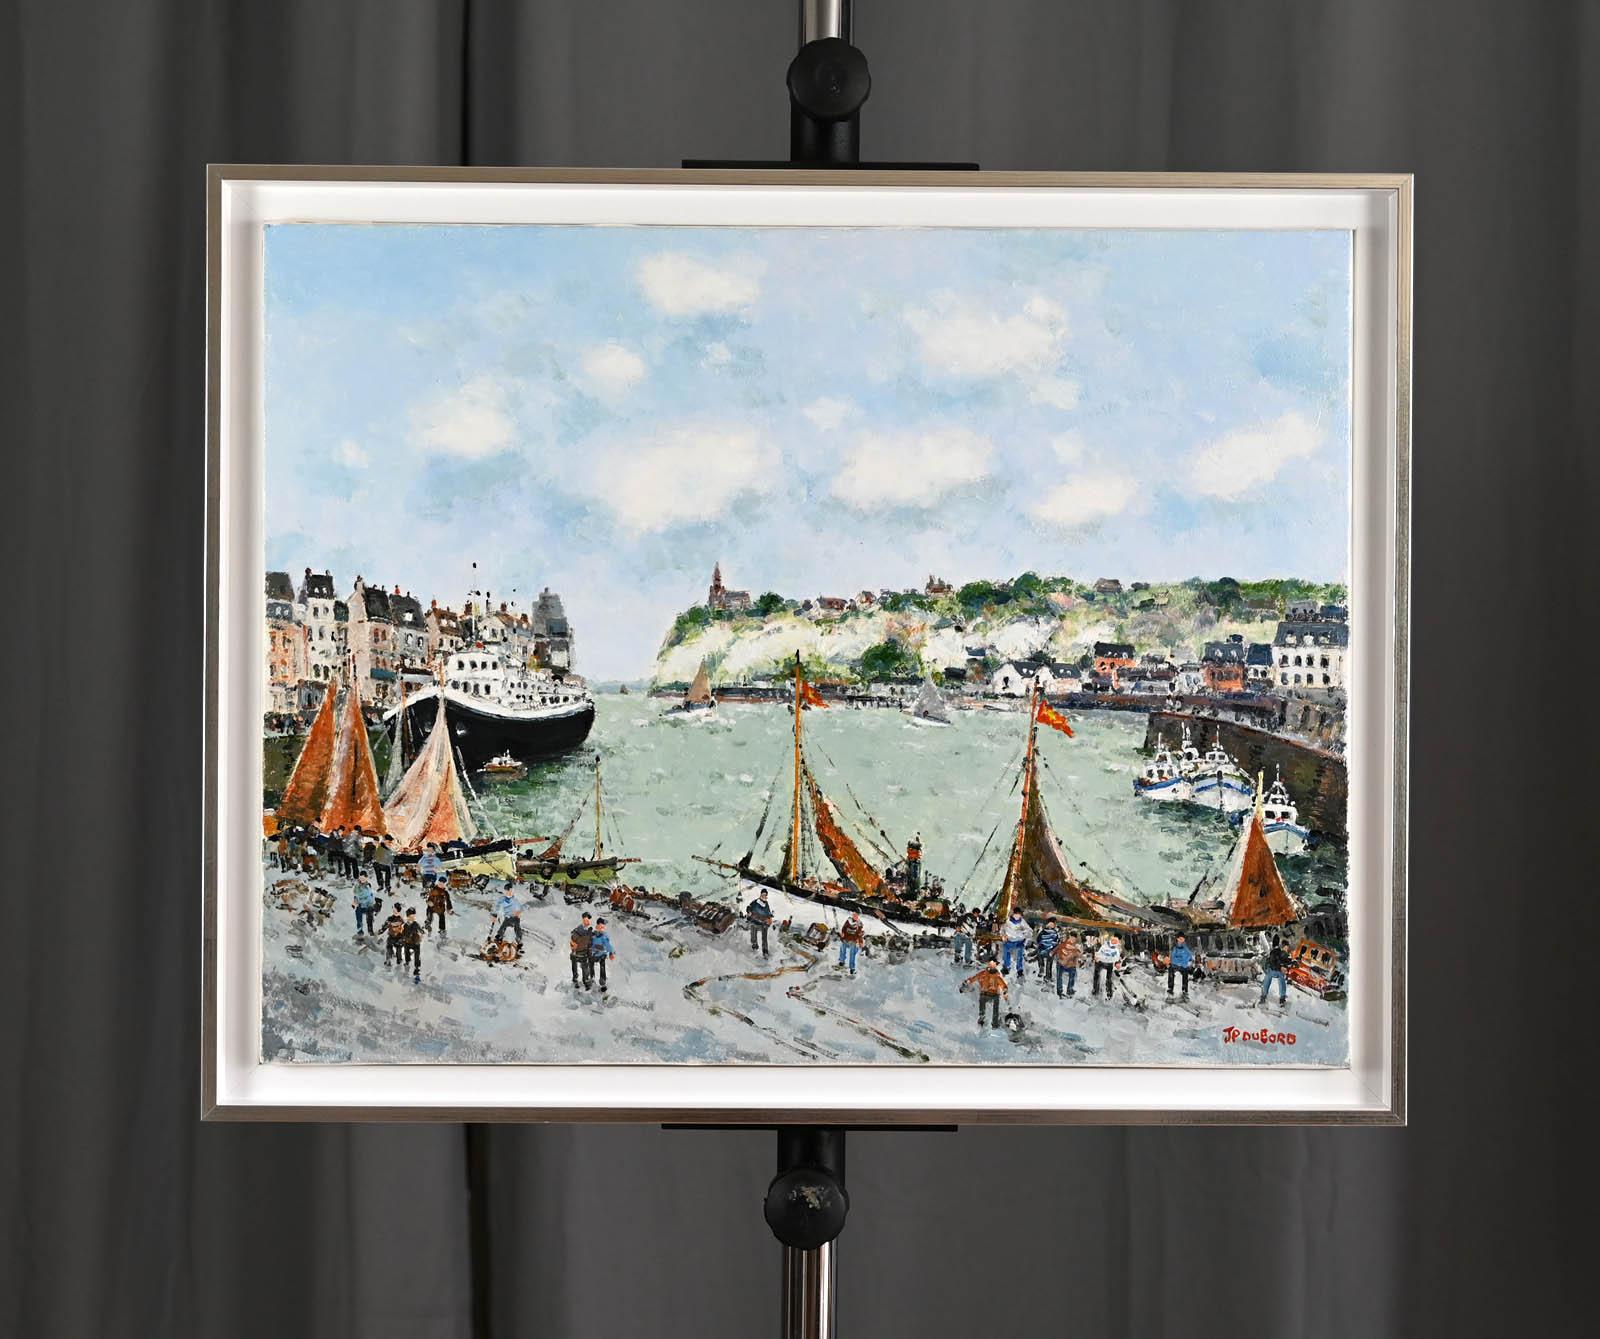 Jean Pierre DUBORD (né en 1949)

Les vieux Gréements dans le port de Dieppe

Oil on canvas
Size: 50 x 65 cm
Signed lower right.
Titled and signed on the back.

Table in perfect condition.
Modern frame
Size with frame: 57 x 72 cm

Sold with invoice